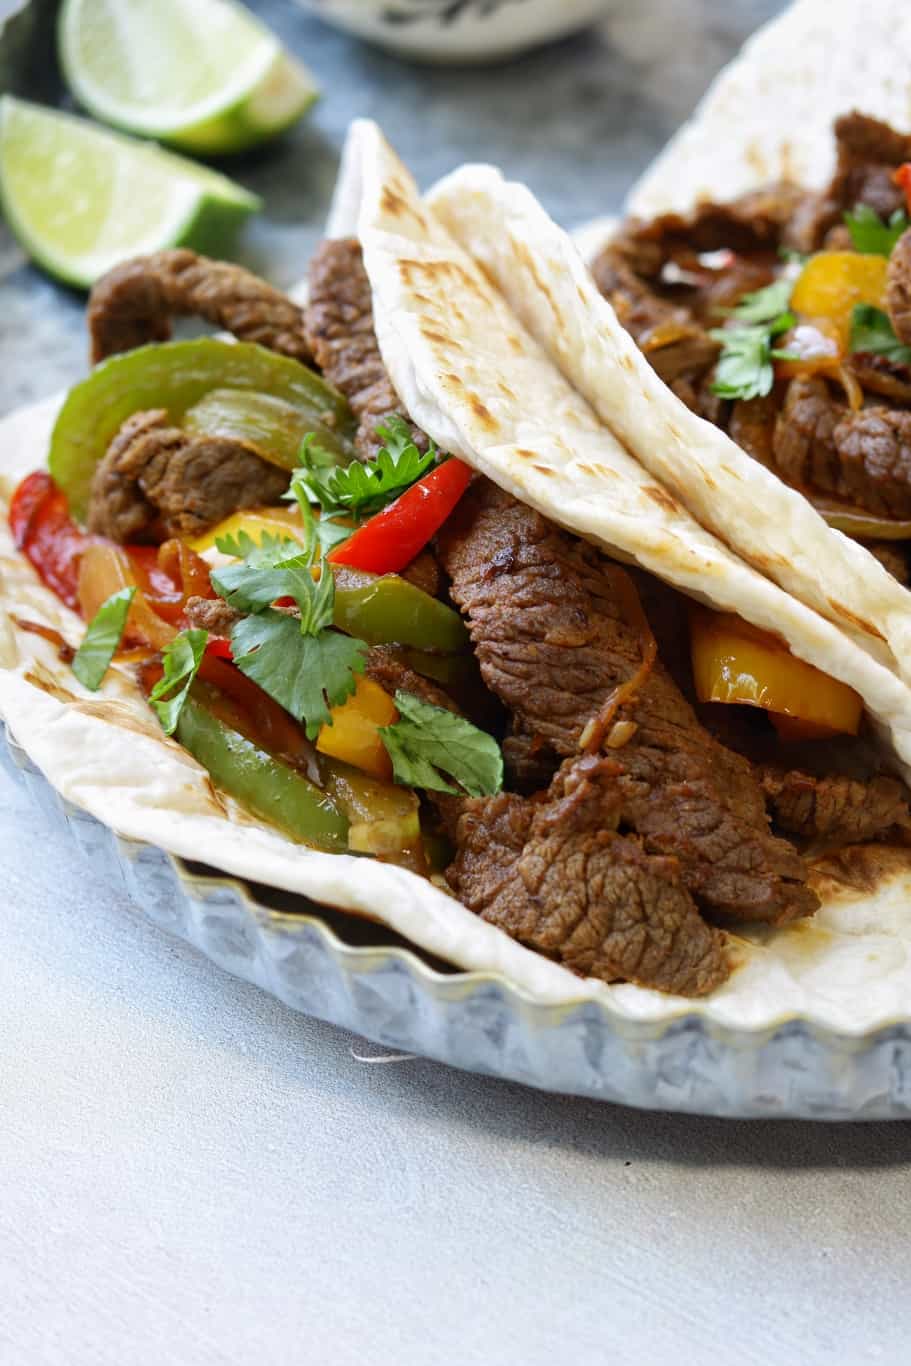 a so delicious warm beef fajita tortillas filled with cooked skirt steak, onions, and bell peppers sprinkled with chopped cilantro